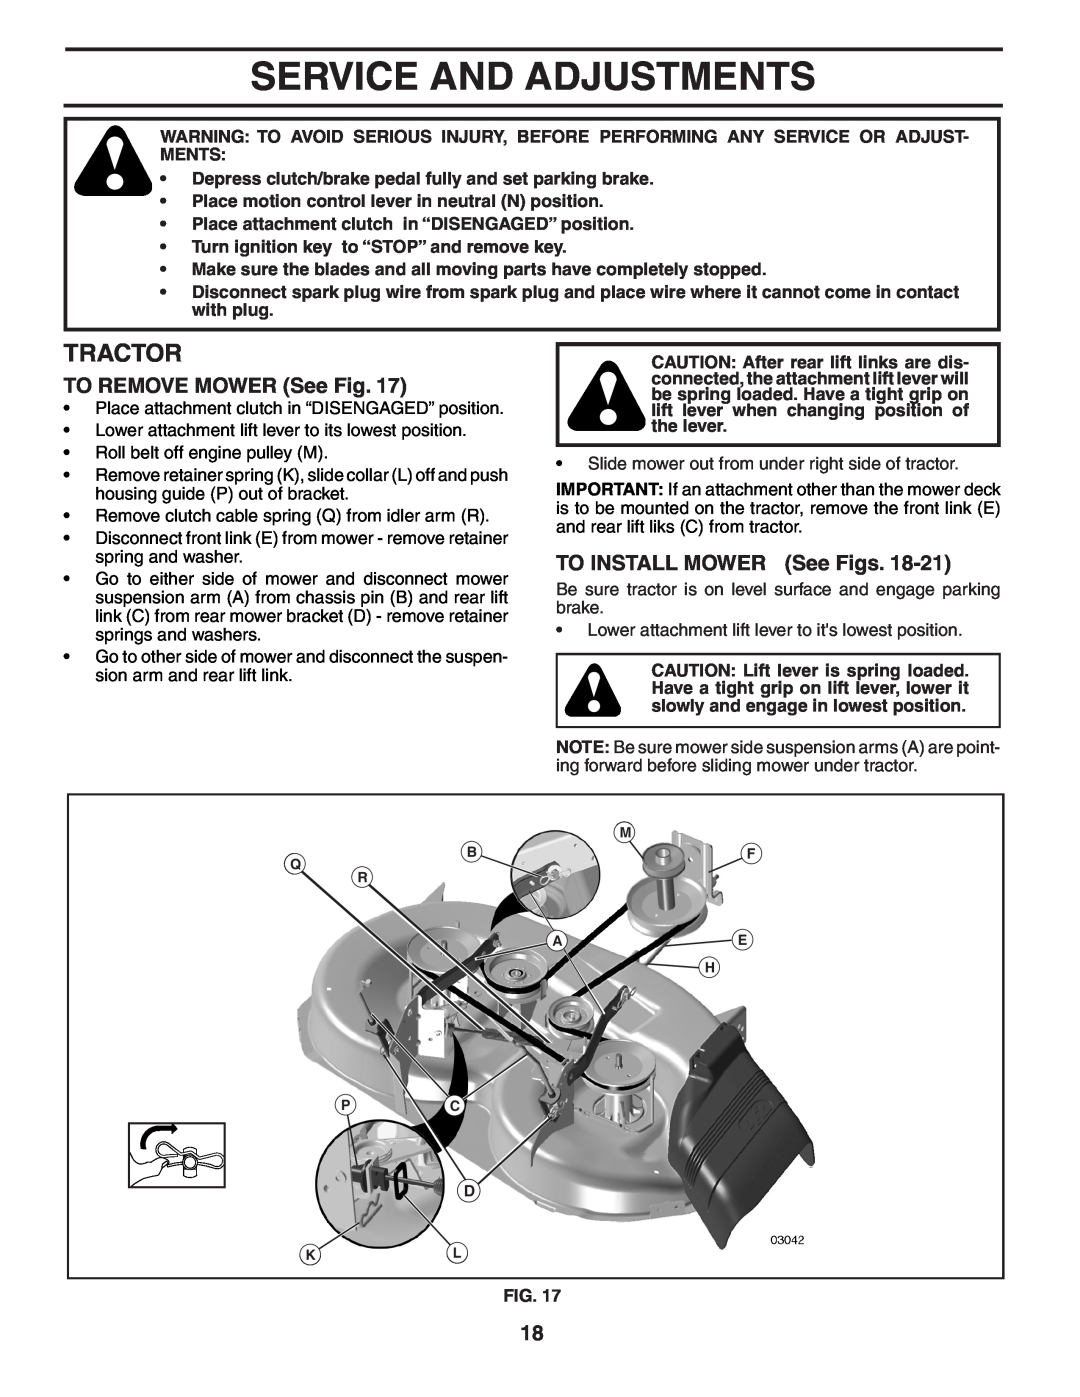 Poulan 404655, 96042000801 manual Service And Adjustments, TO REMOVE MOWER See Fig, TO INSTALL MOWER See Figs, Tractor 